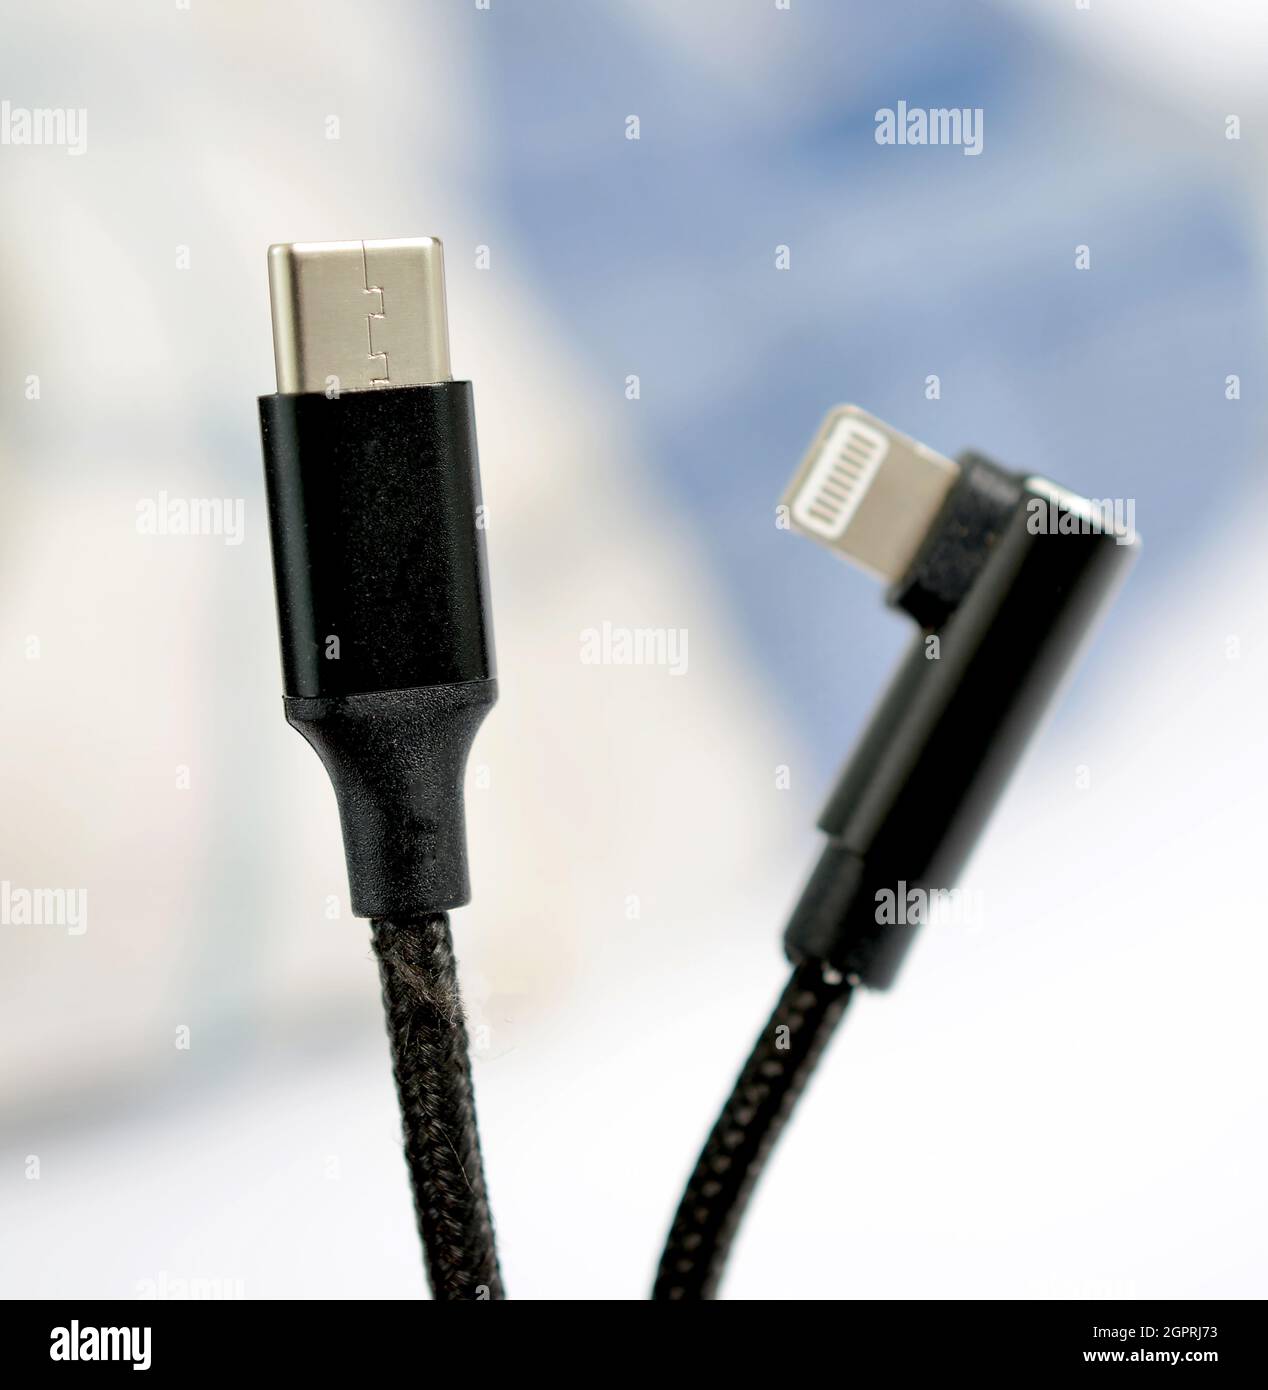 Lightning Cable High Resolution Stock Photography and Images - Alamy